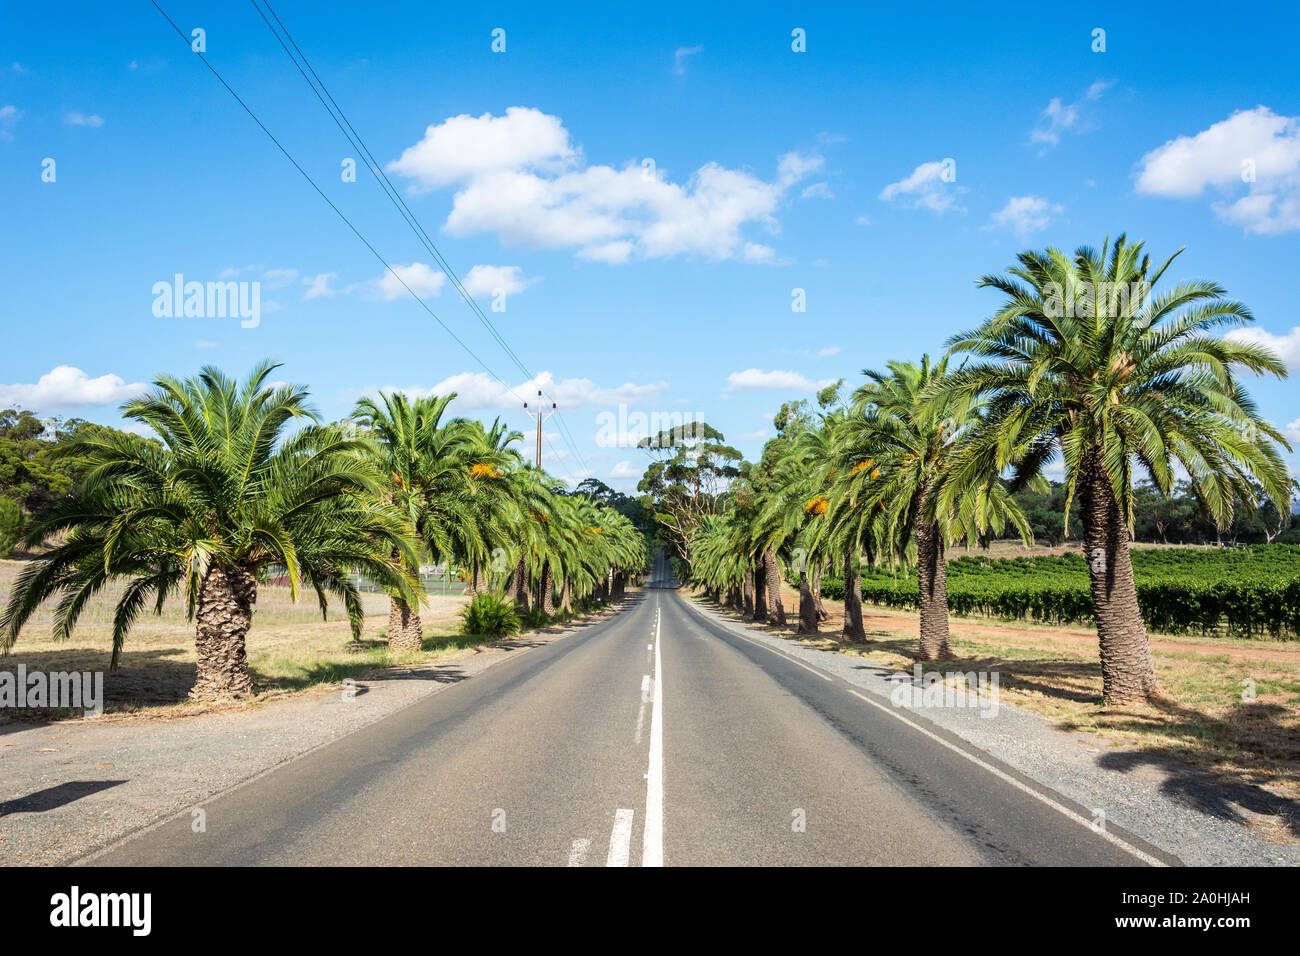 Seppeltsfield road lined with huge palm trees in Barossa Valley, South Australia. Stock Photo